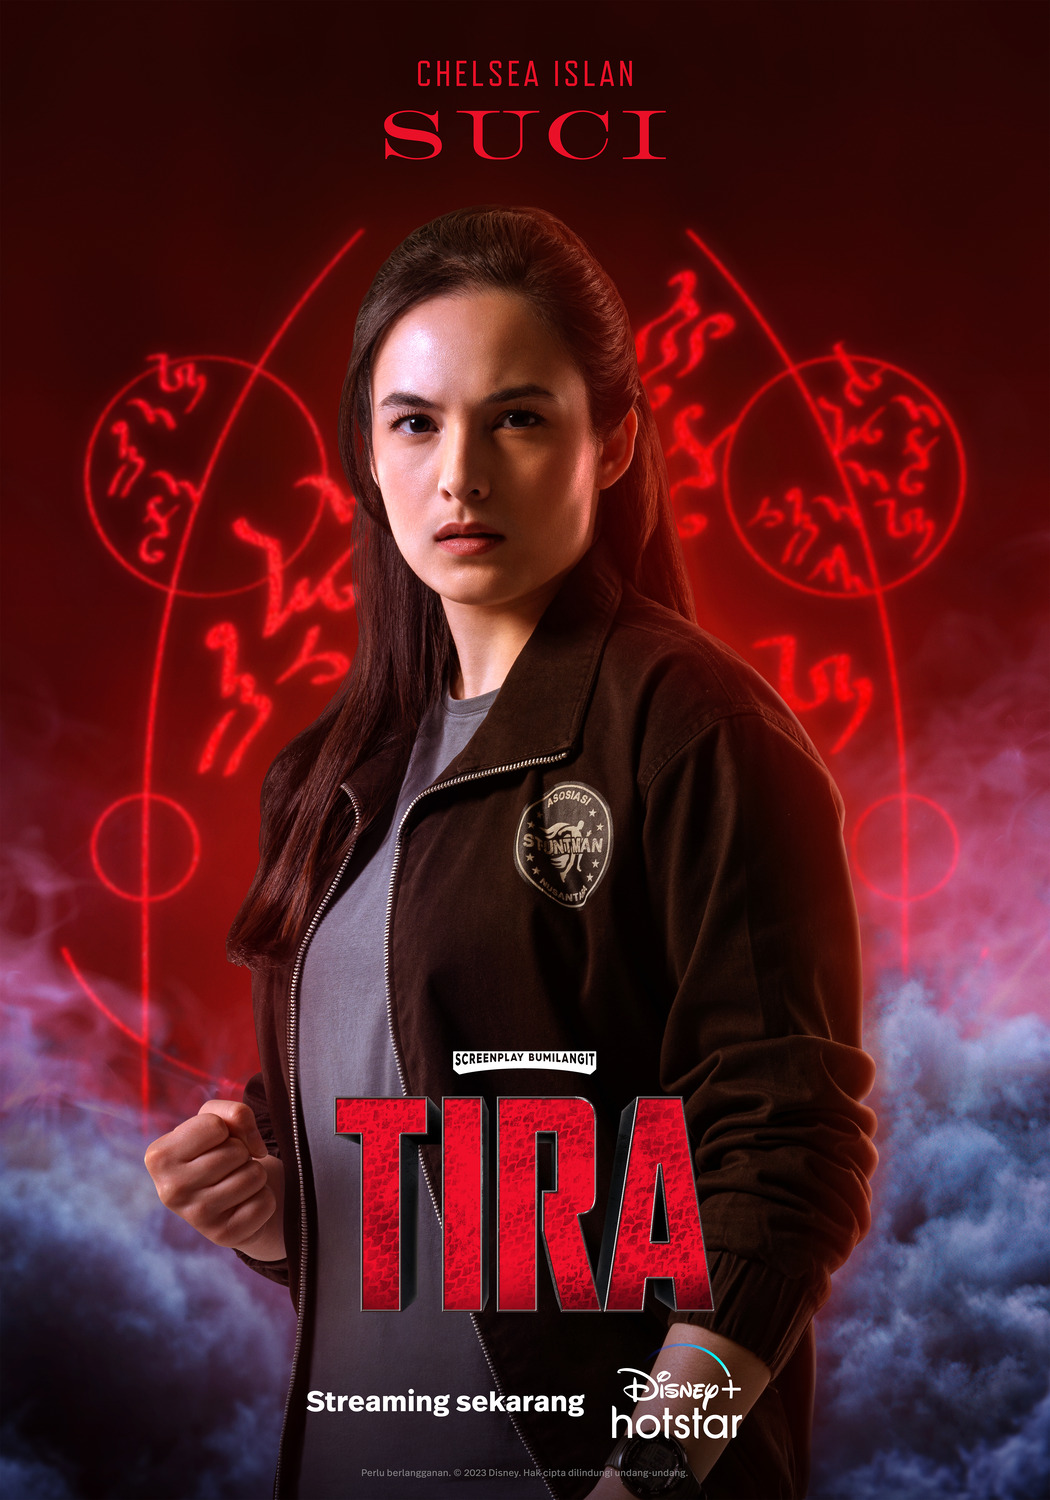 Extra Large TV Poster Image for Tira (#4 of 12)